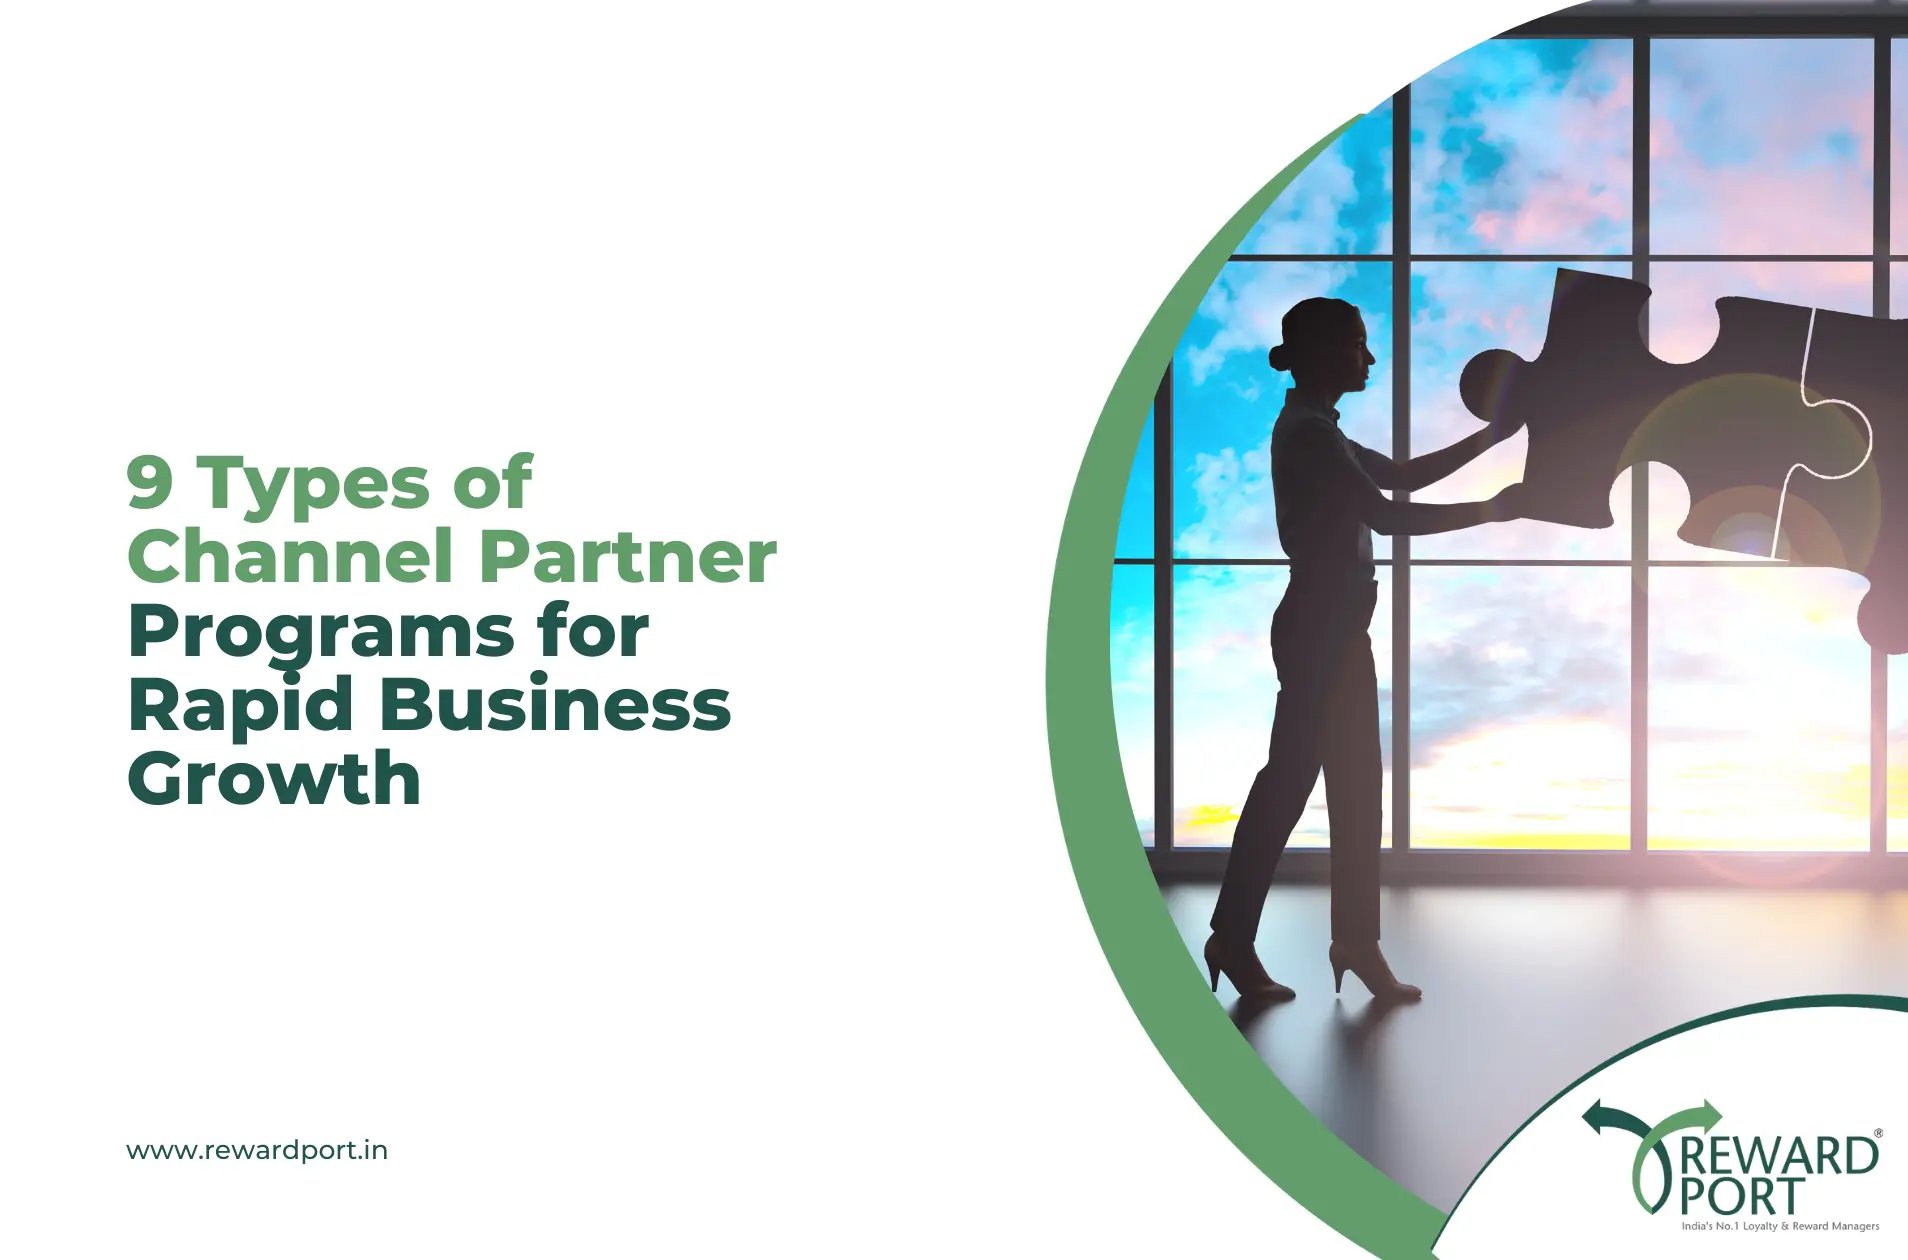 9 Types of Channel Partner Programs for Rapid Business Growth